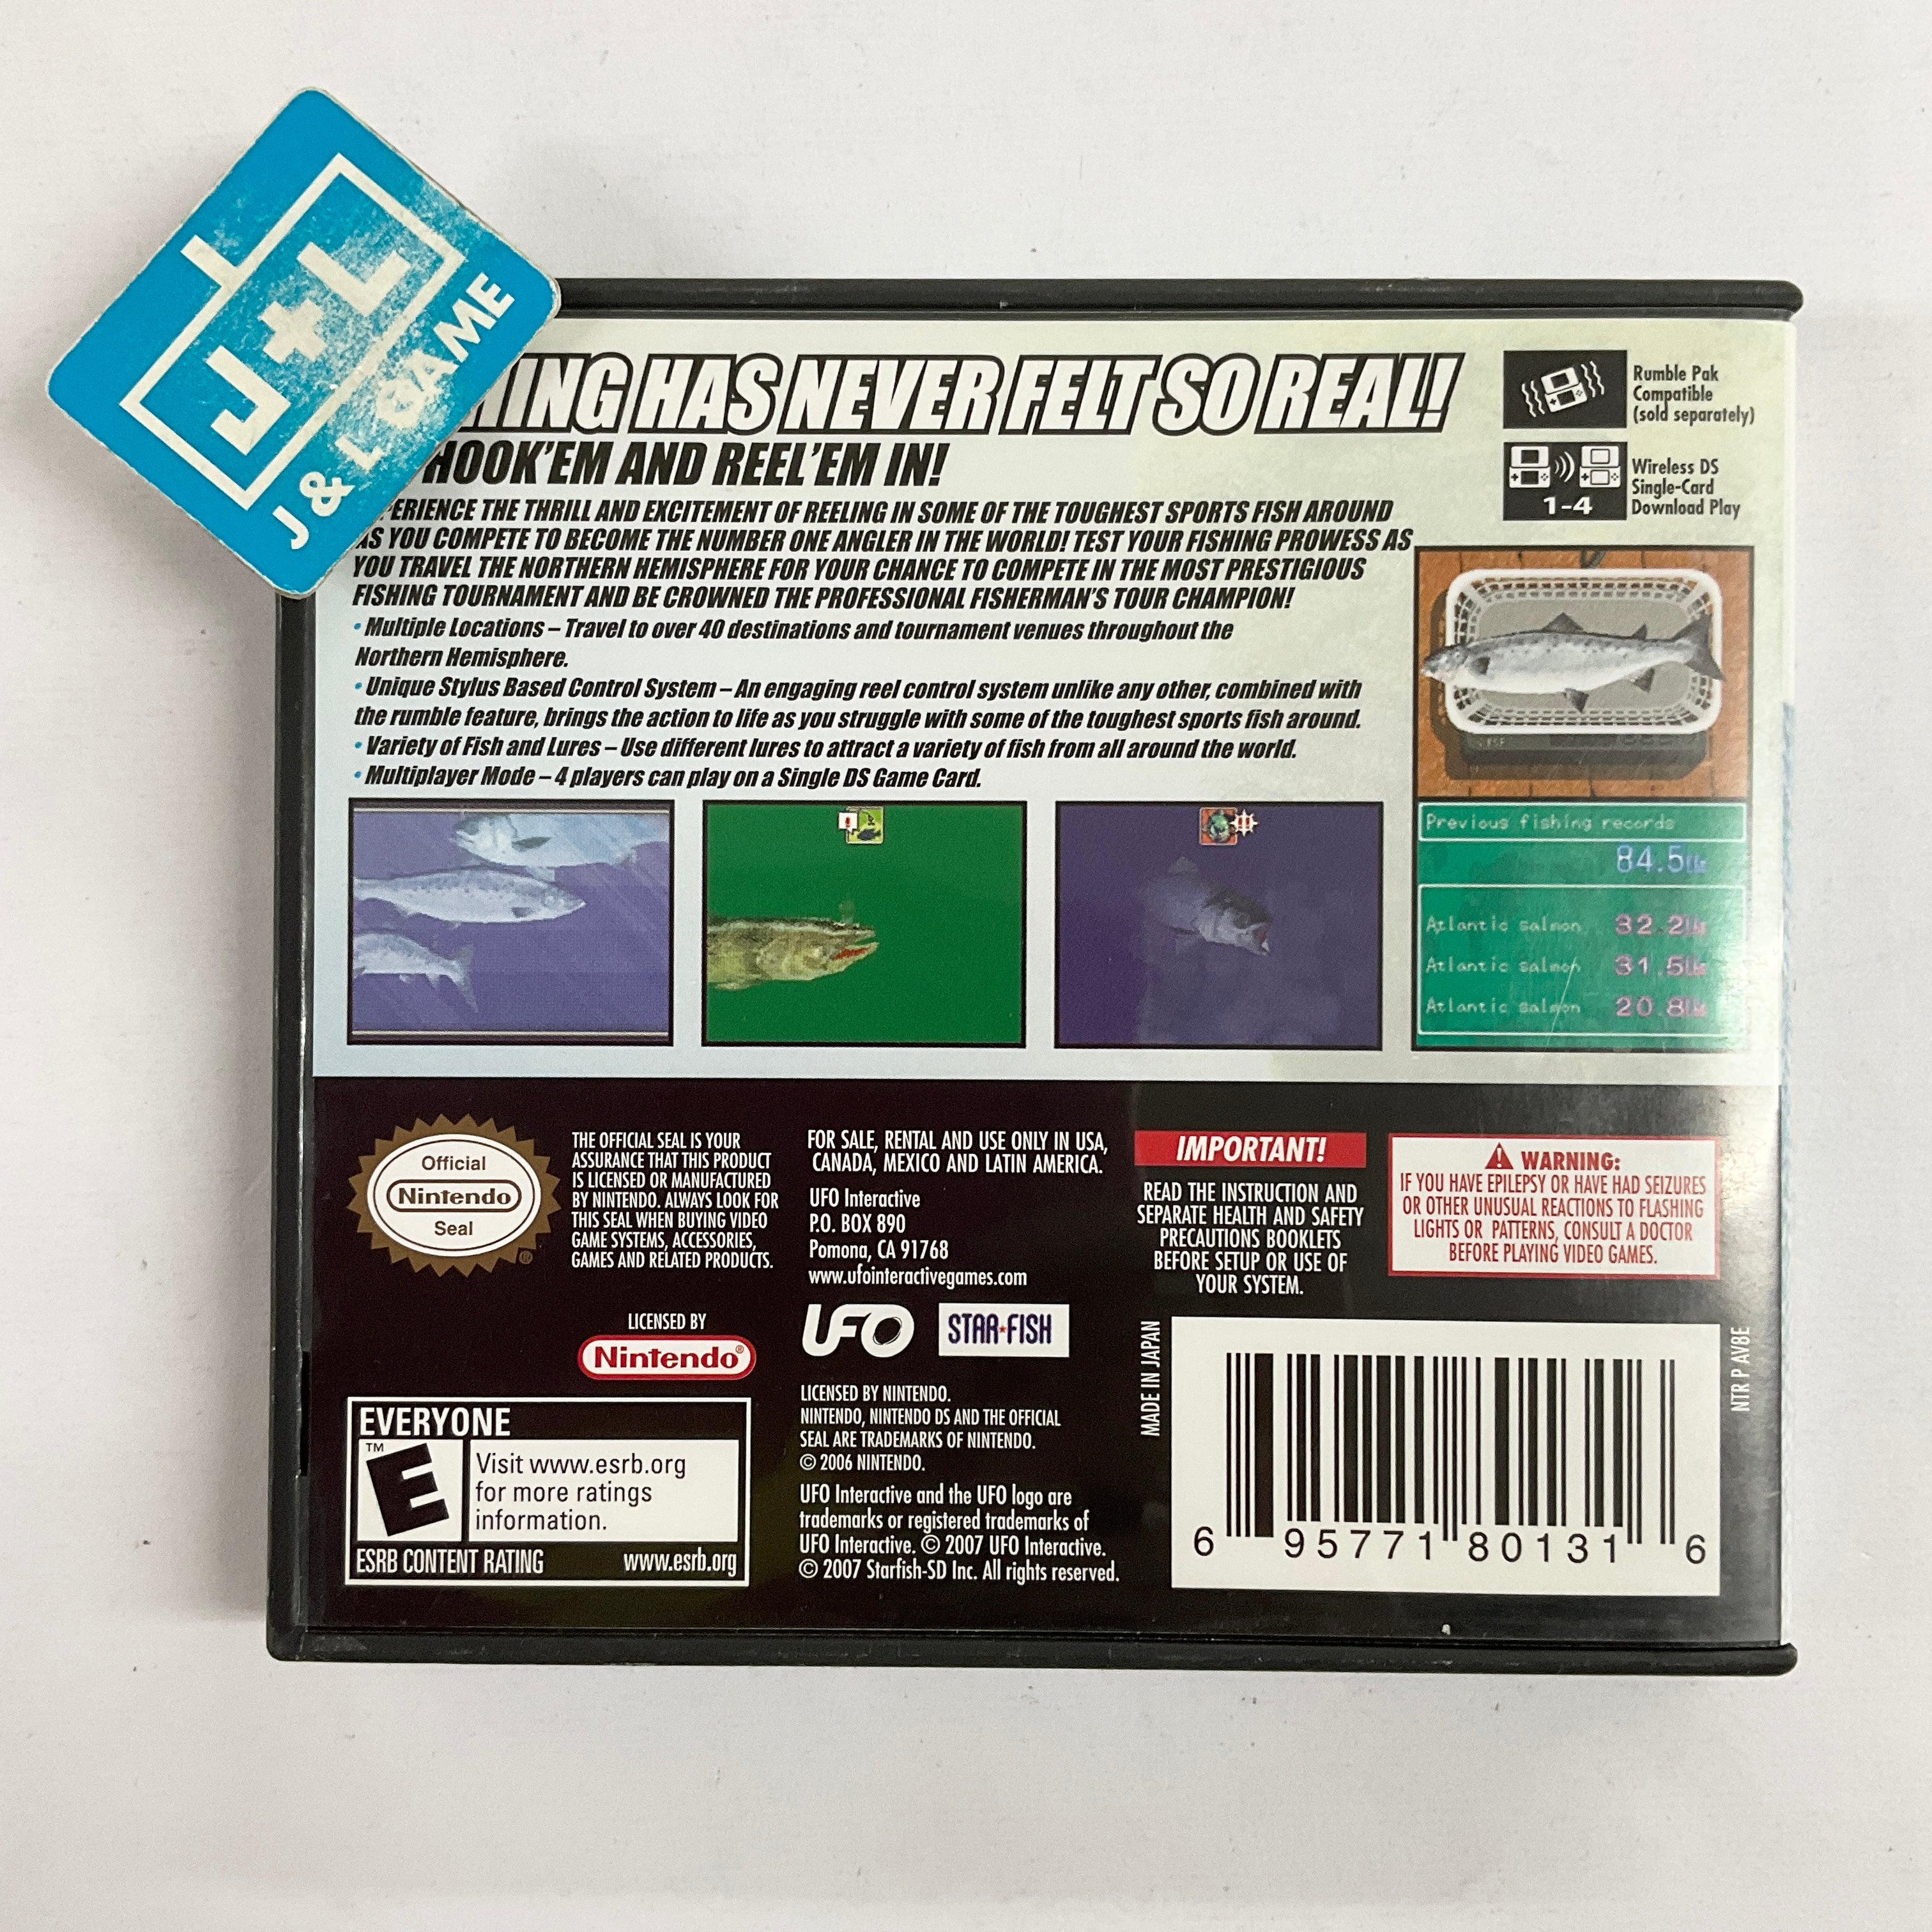 Professional Fisherman's Tour: Northern Hemisphere - (NDS) Nintendo DS [Pre-Owned] Video Games Tommo   